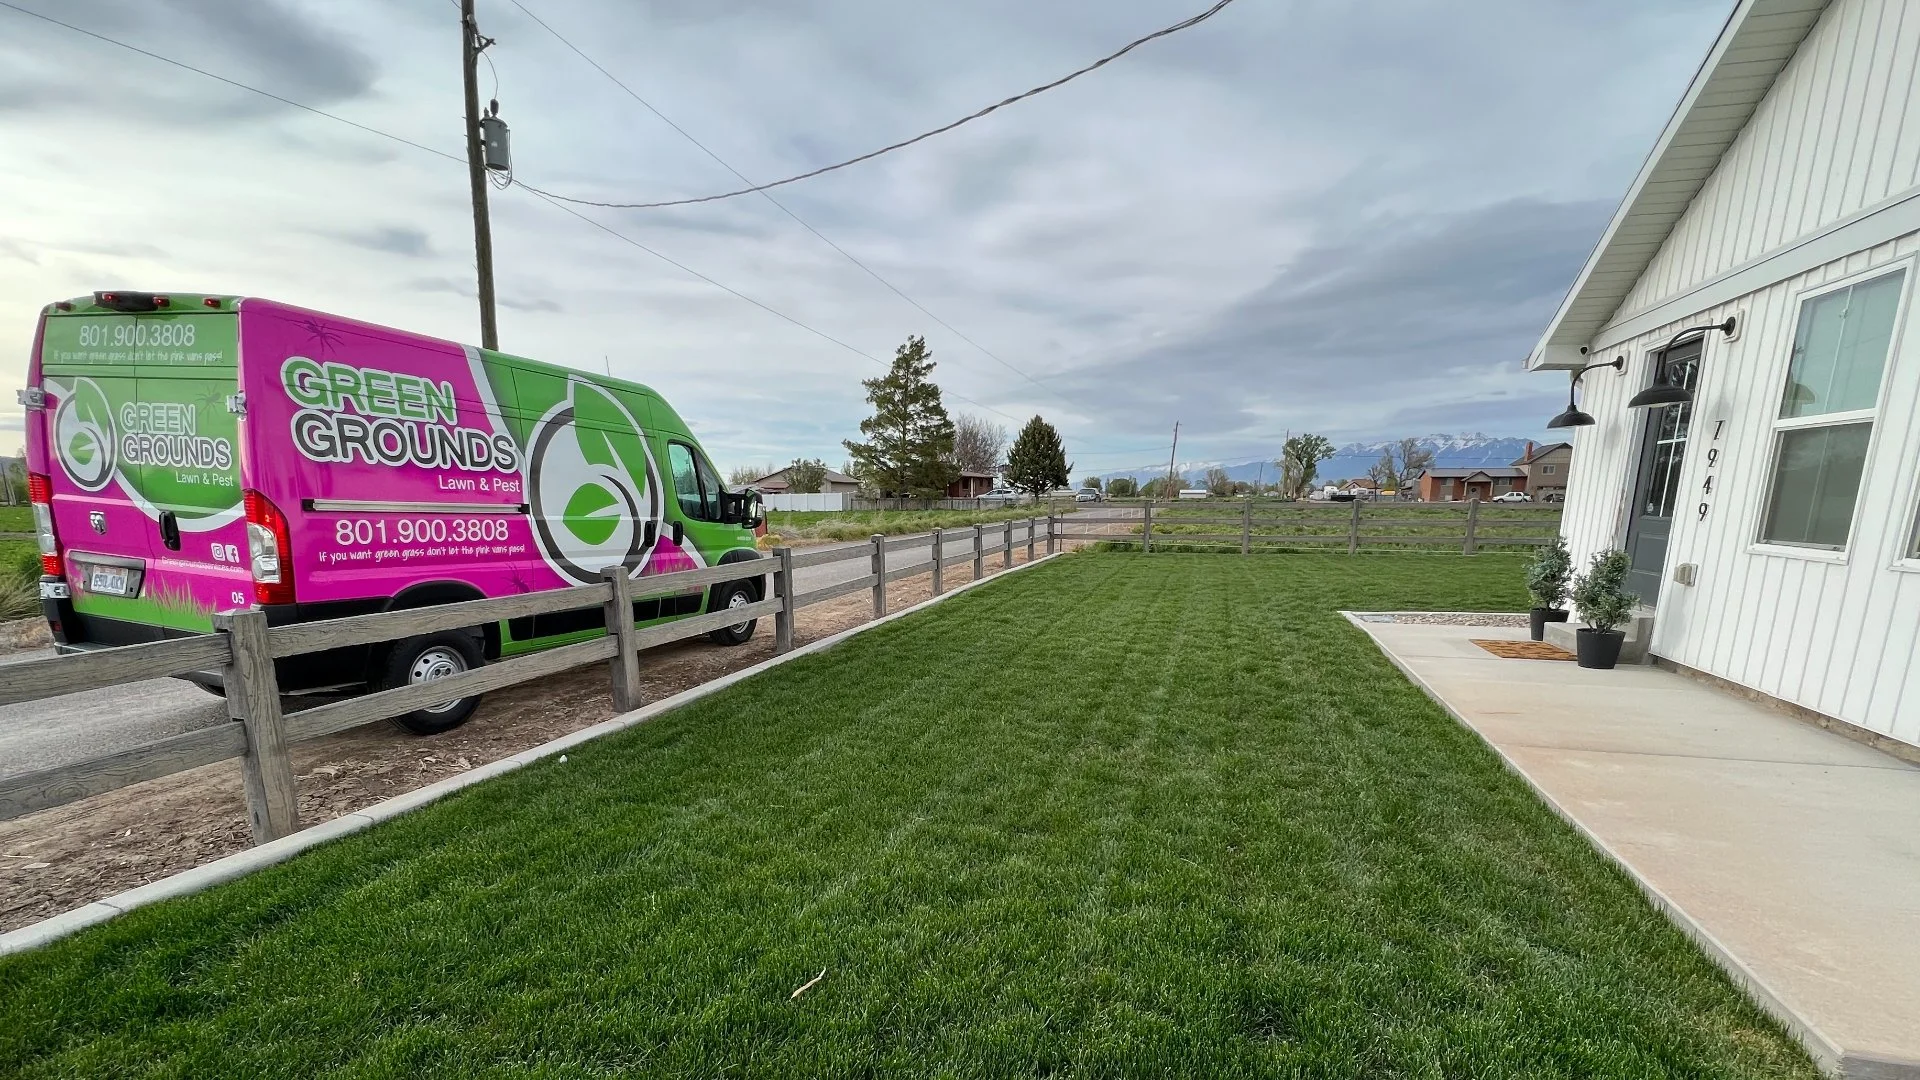 Green Grounds Lawn & Pest van at customer's house in Midway, UT for weed control treatments.